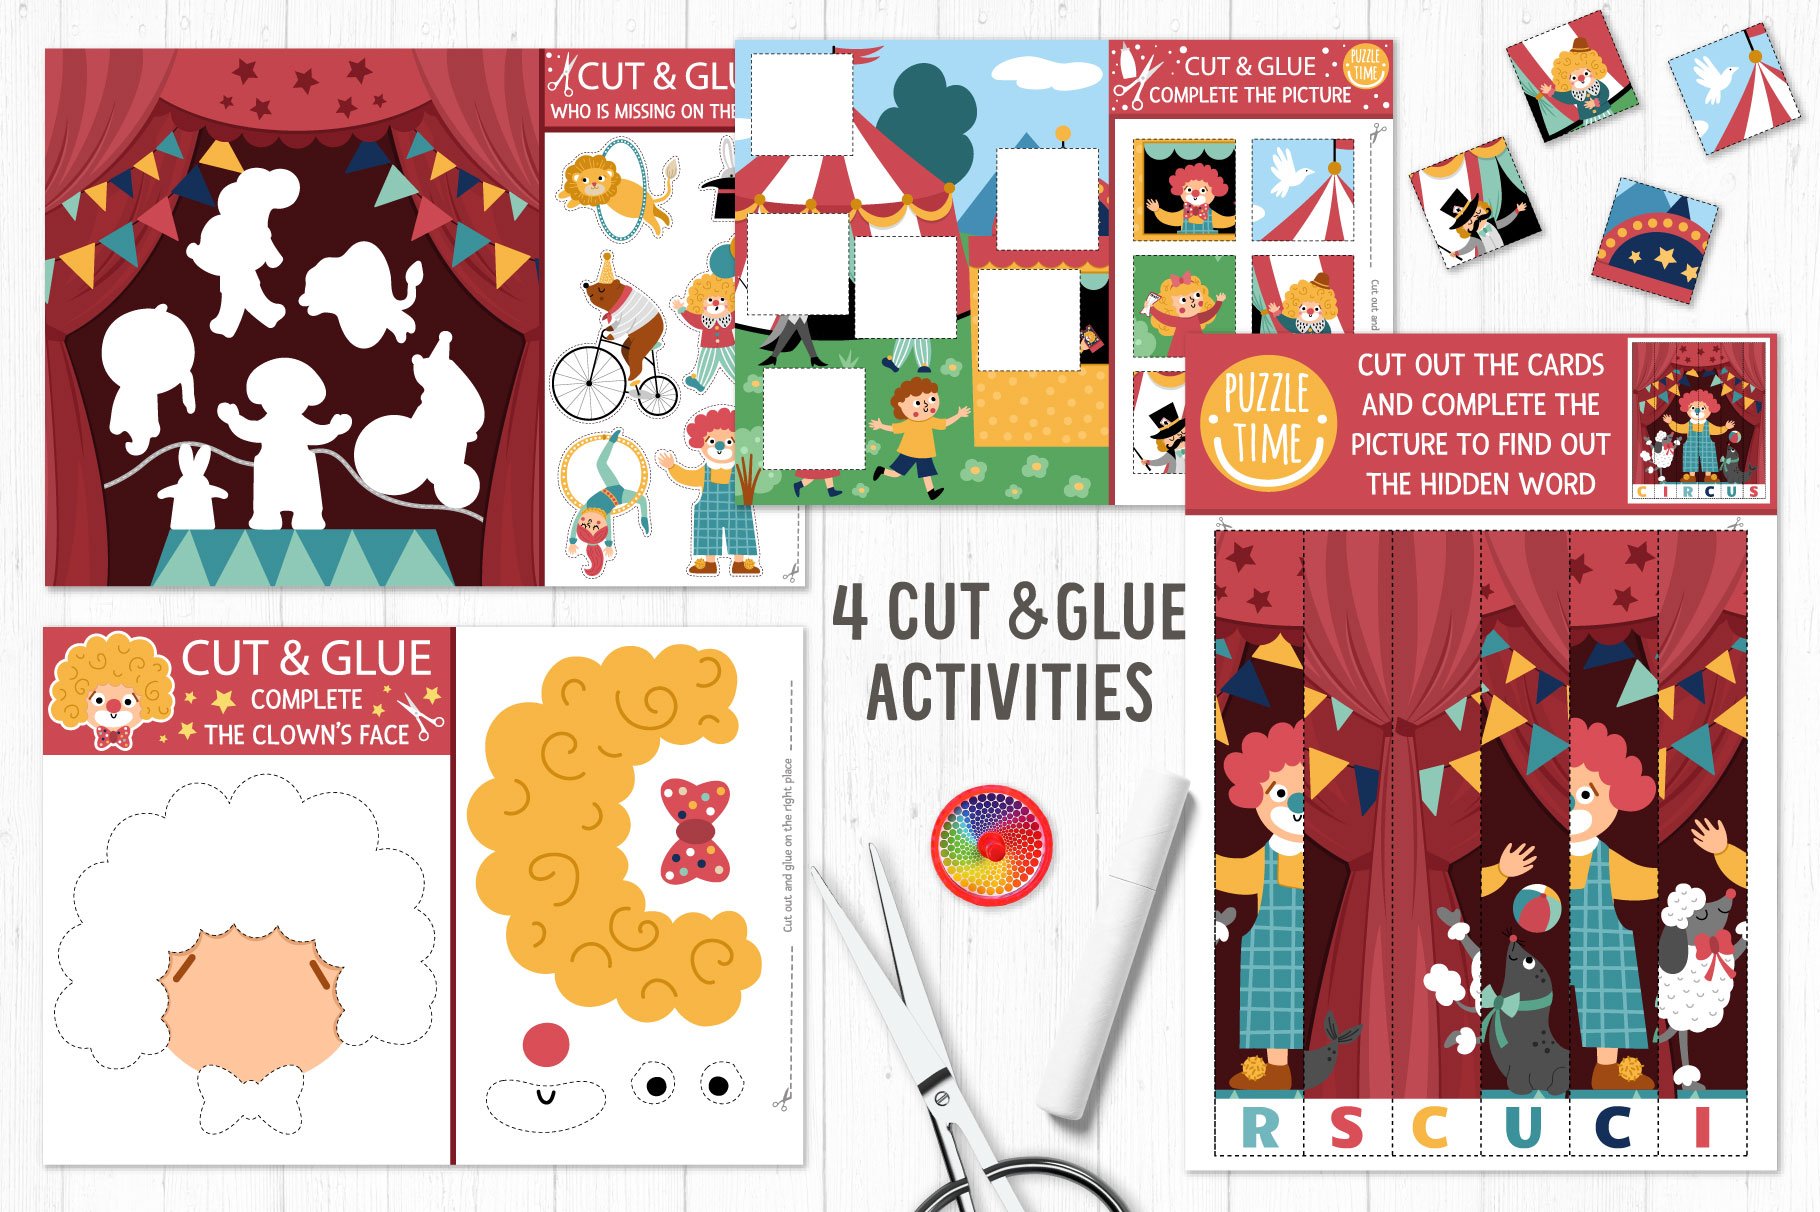 Cut&glue activities preview.